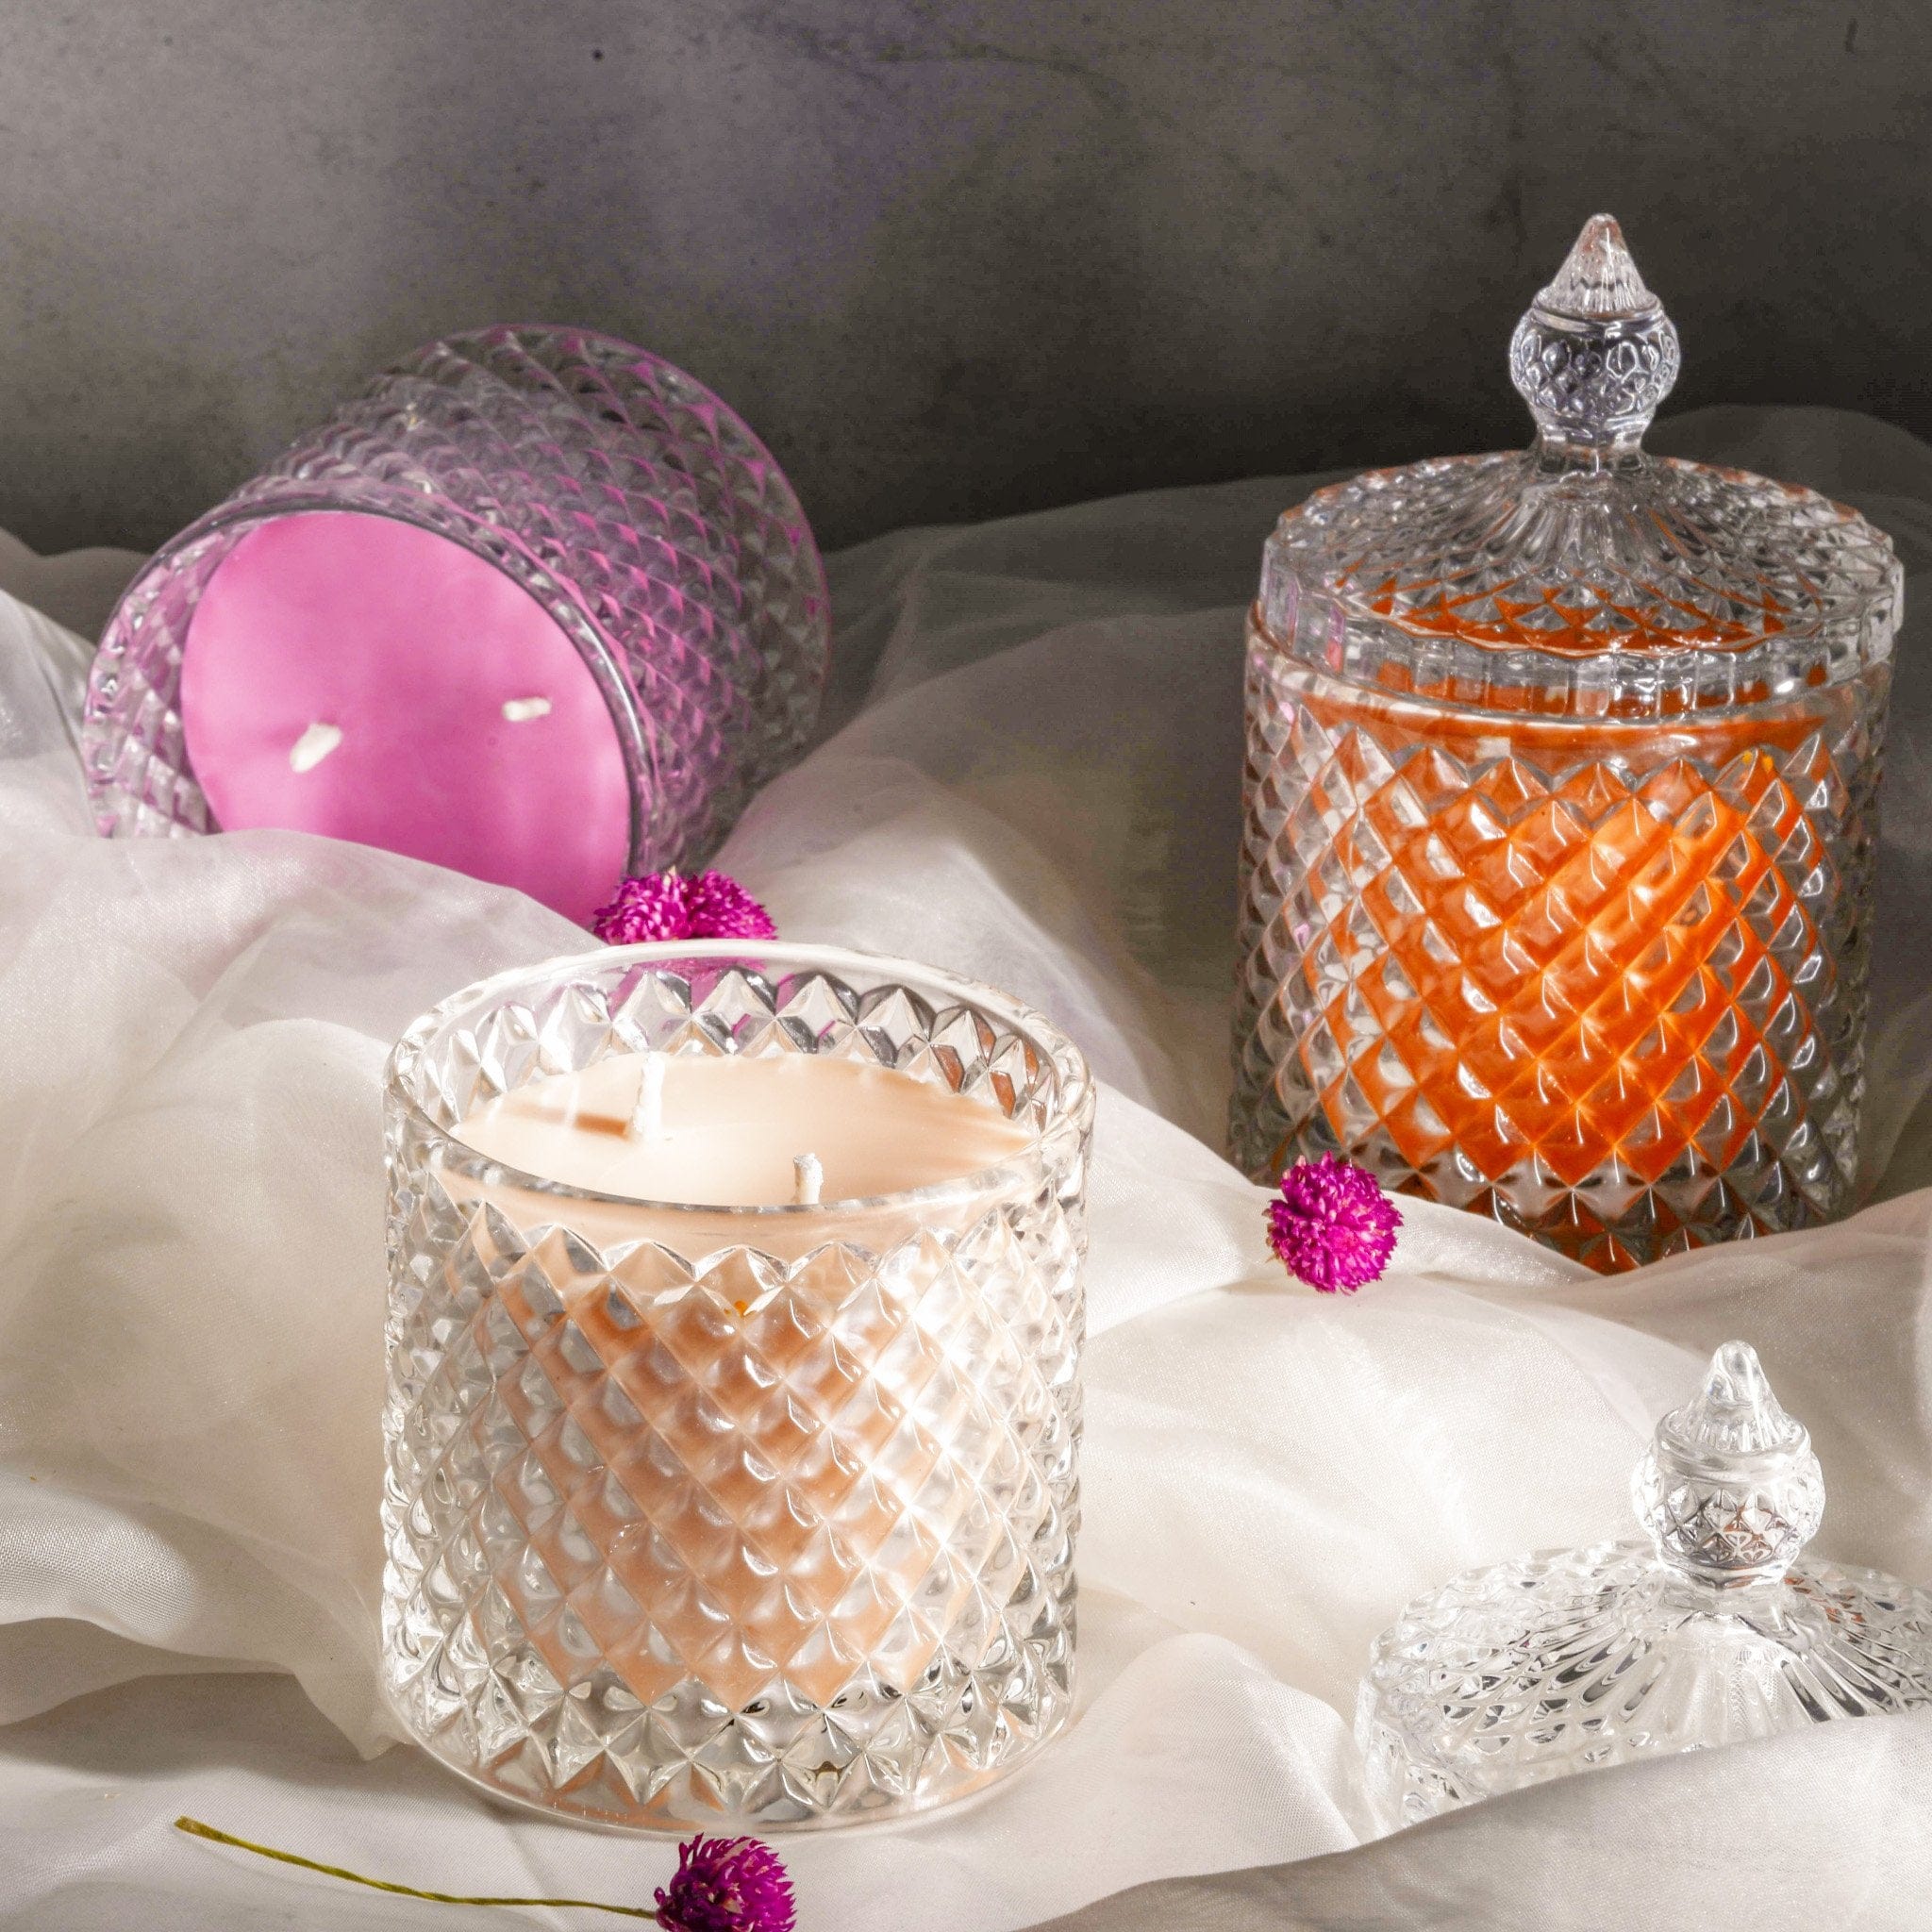 2 Wick Candle Gift Sets Online for Diwali Decoration